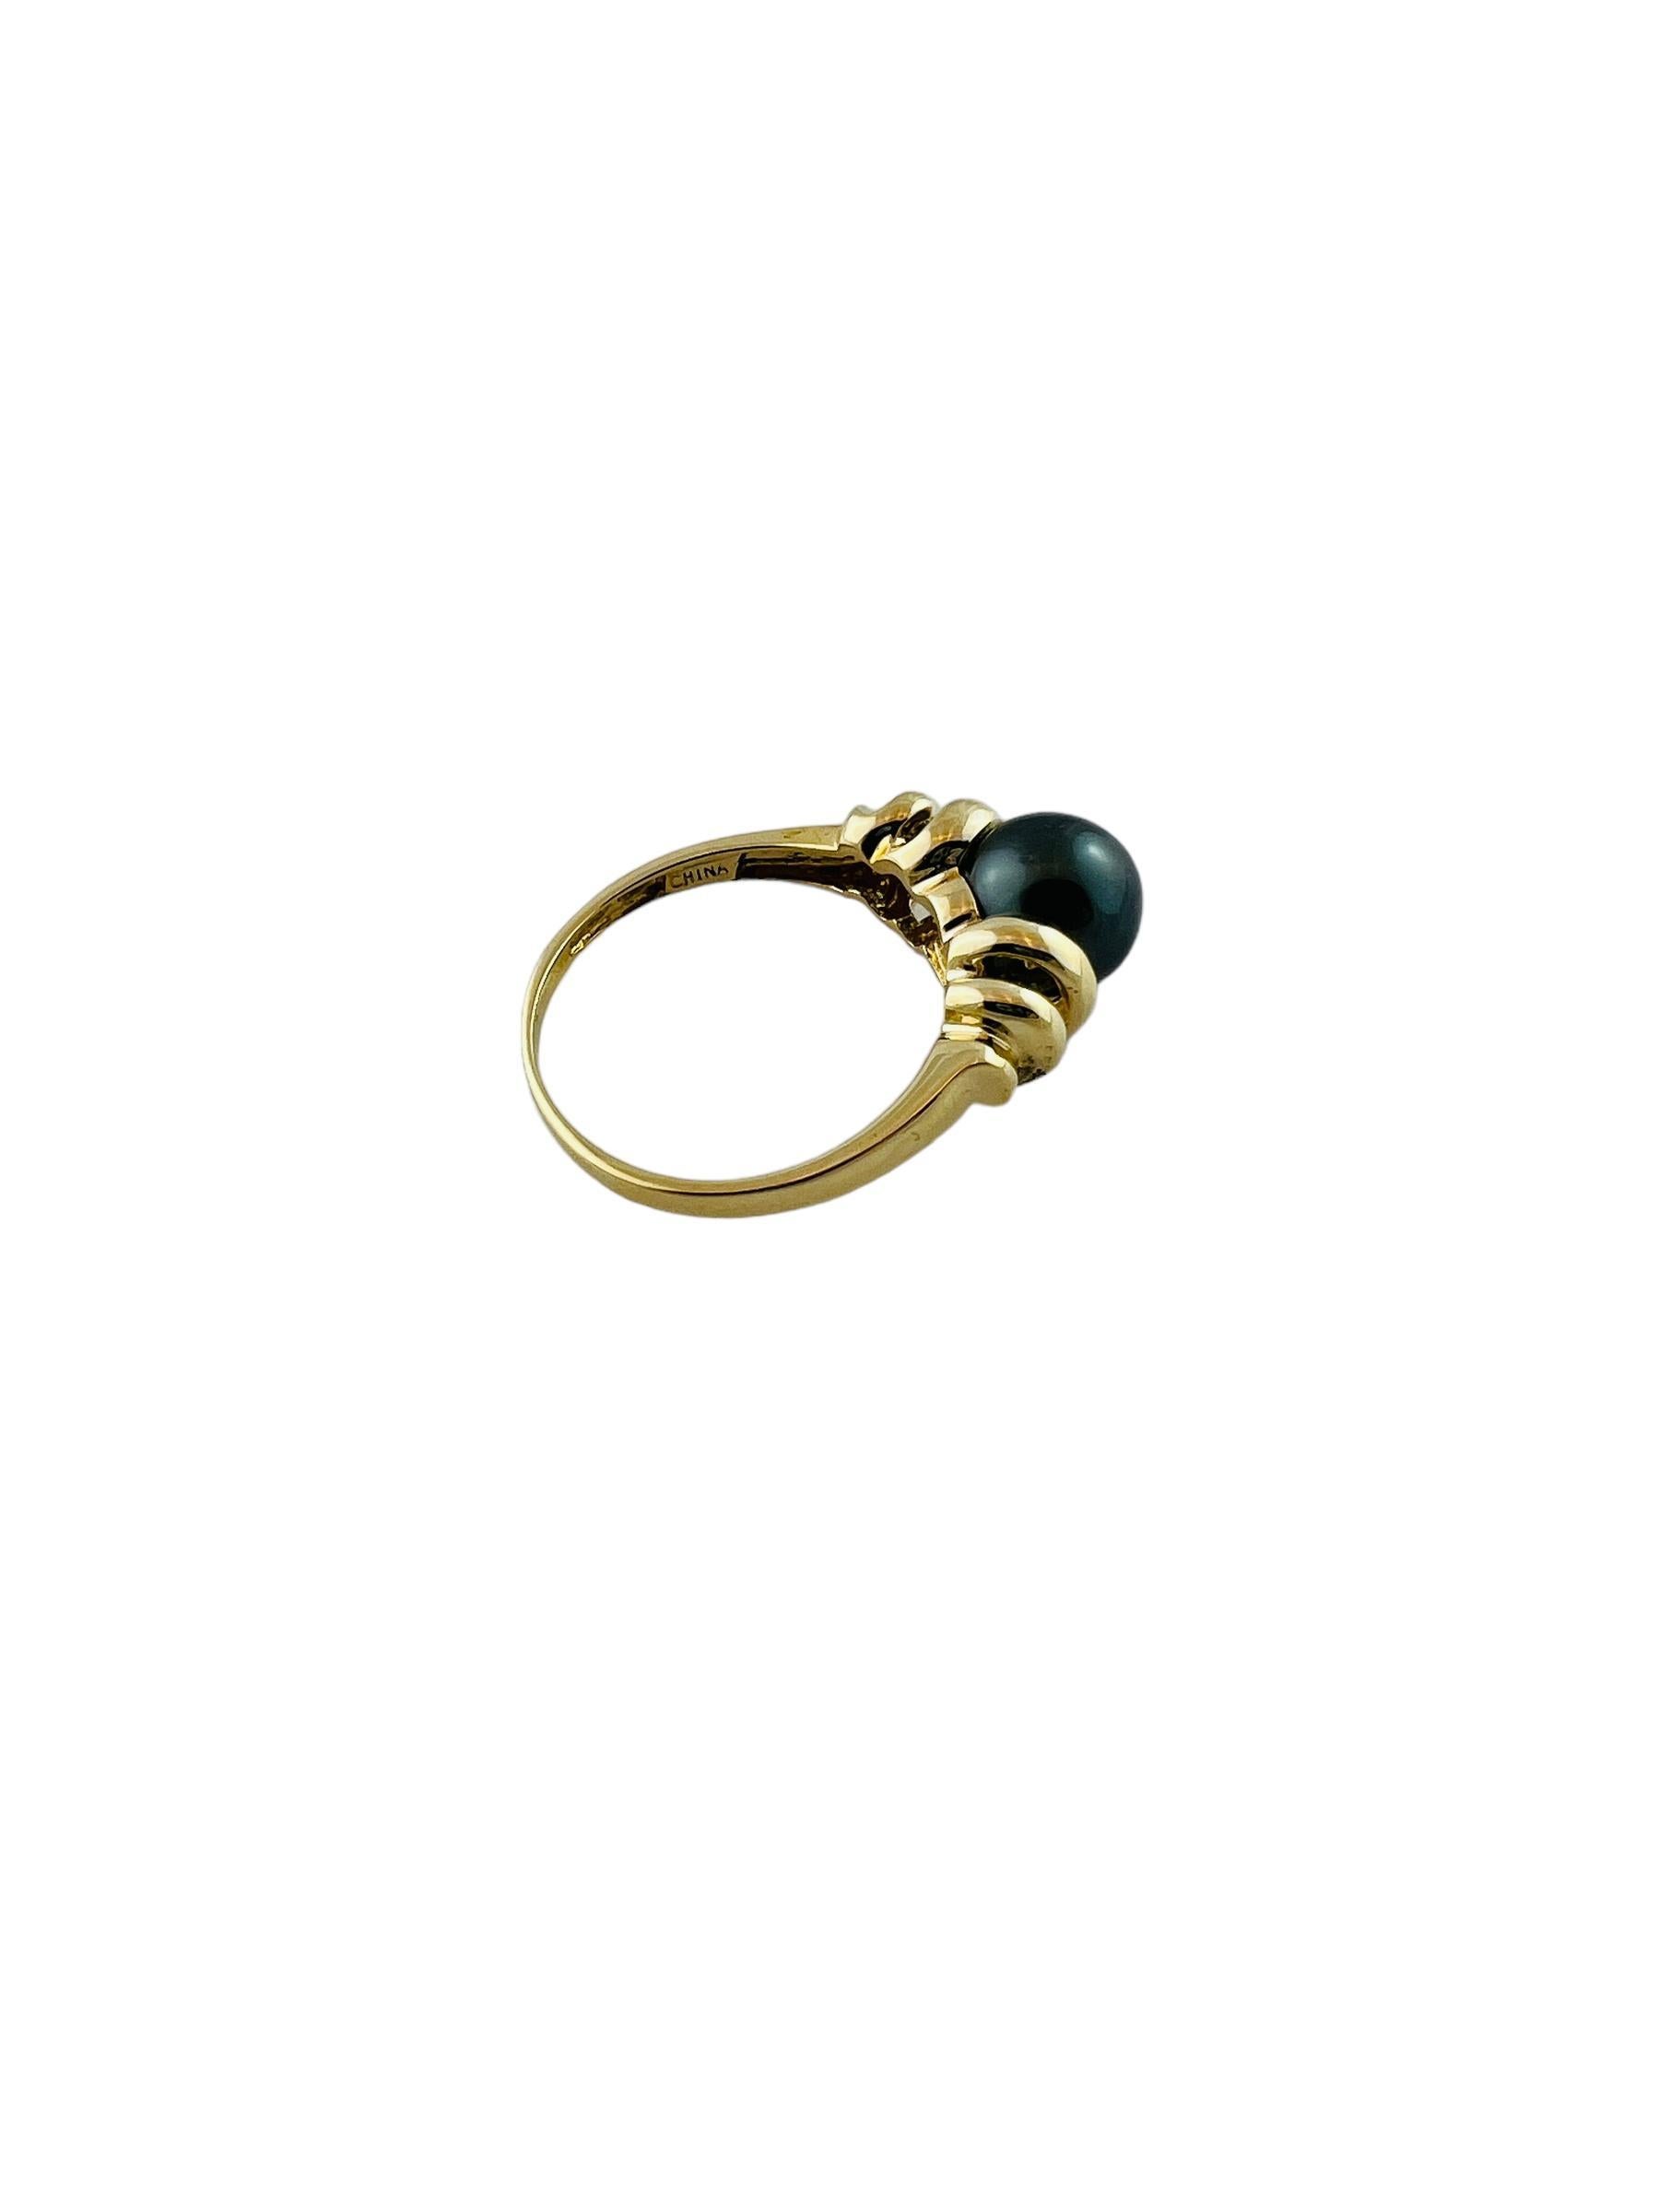 14K Yellow Gold Black Pearl Ring Size 7.25 #15671 1